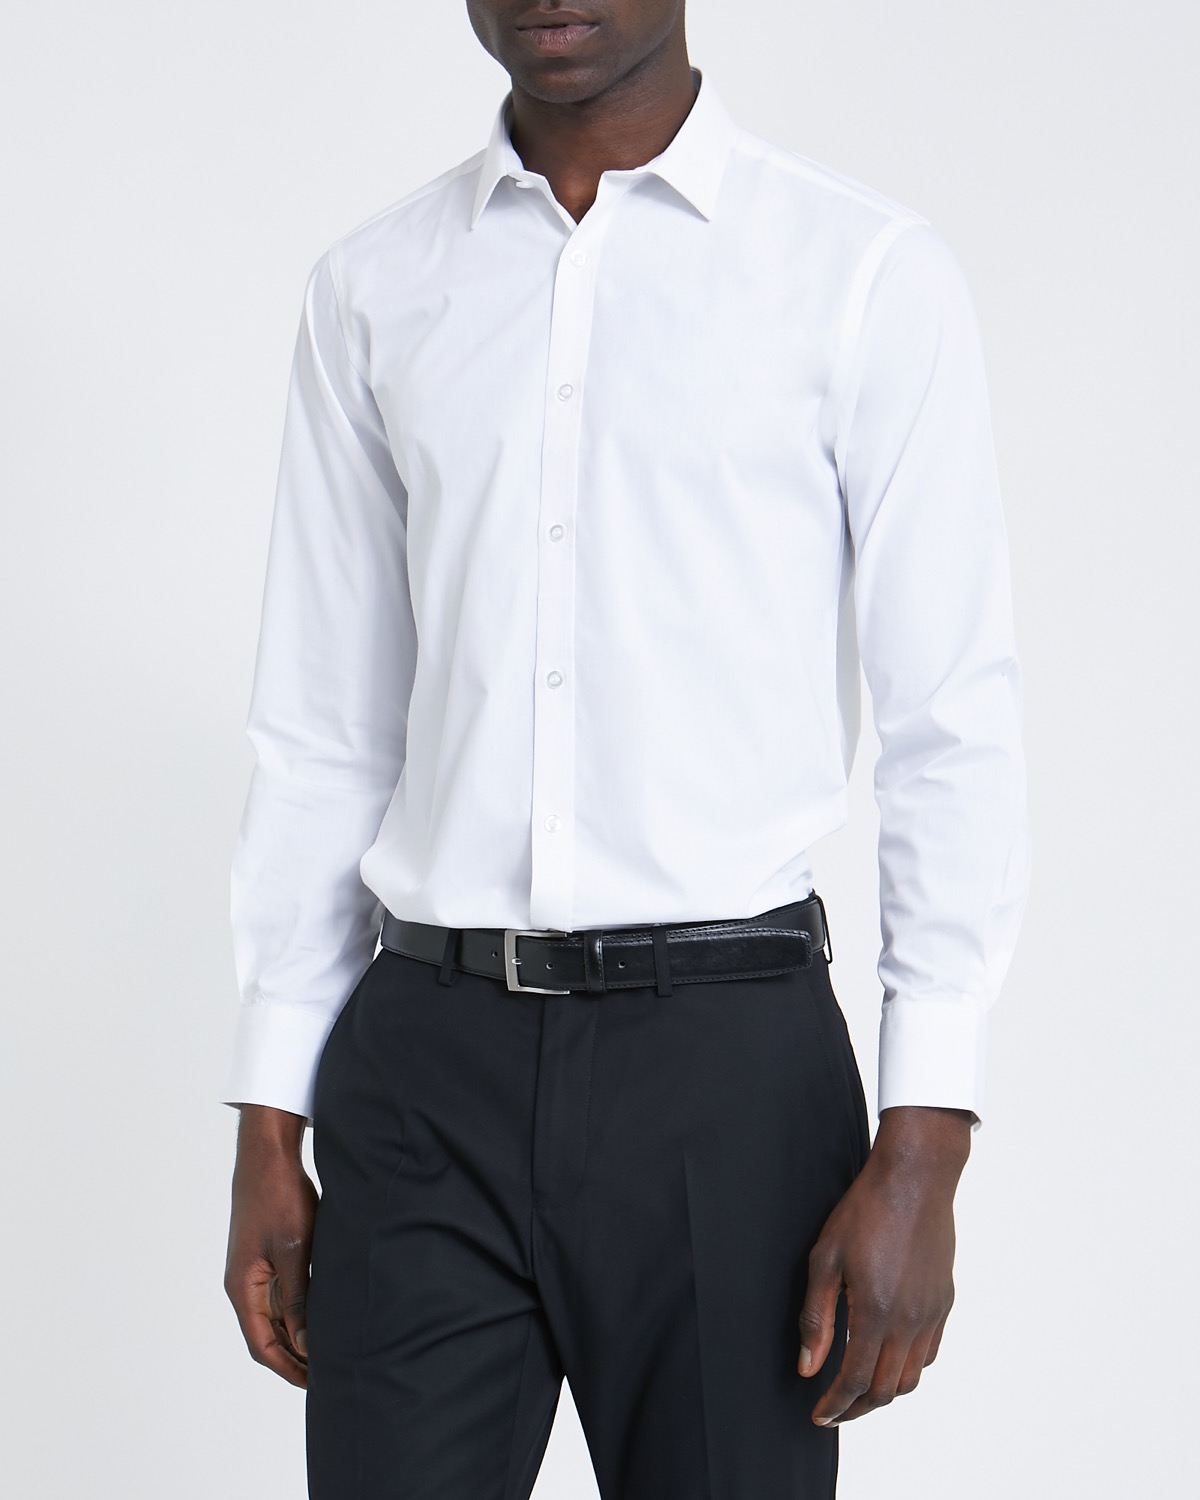 Dunnes Stores | White Slim Fit Design Shirt and Tie set